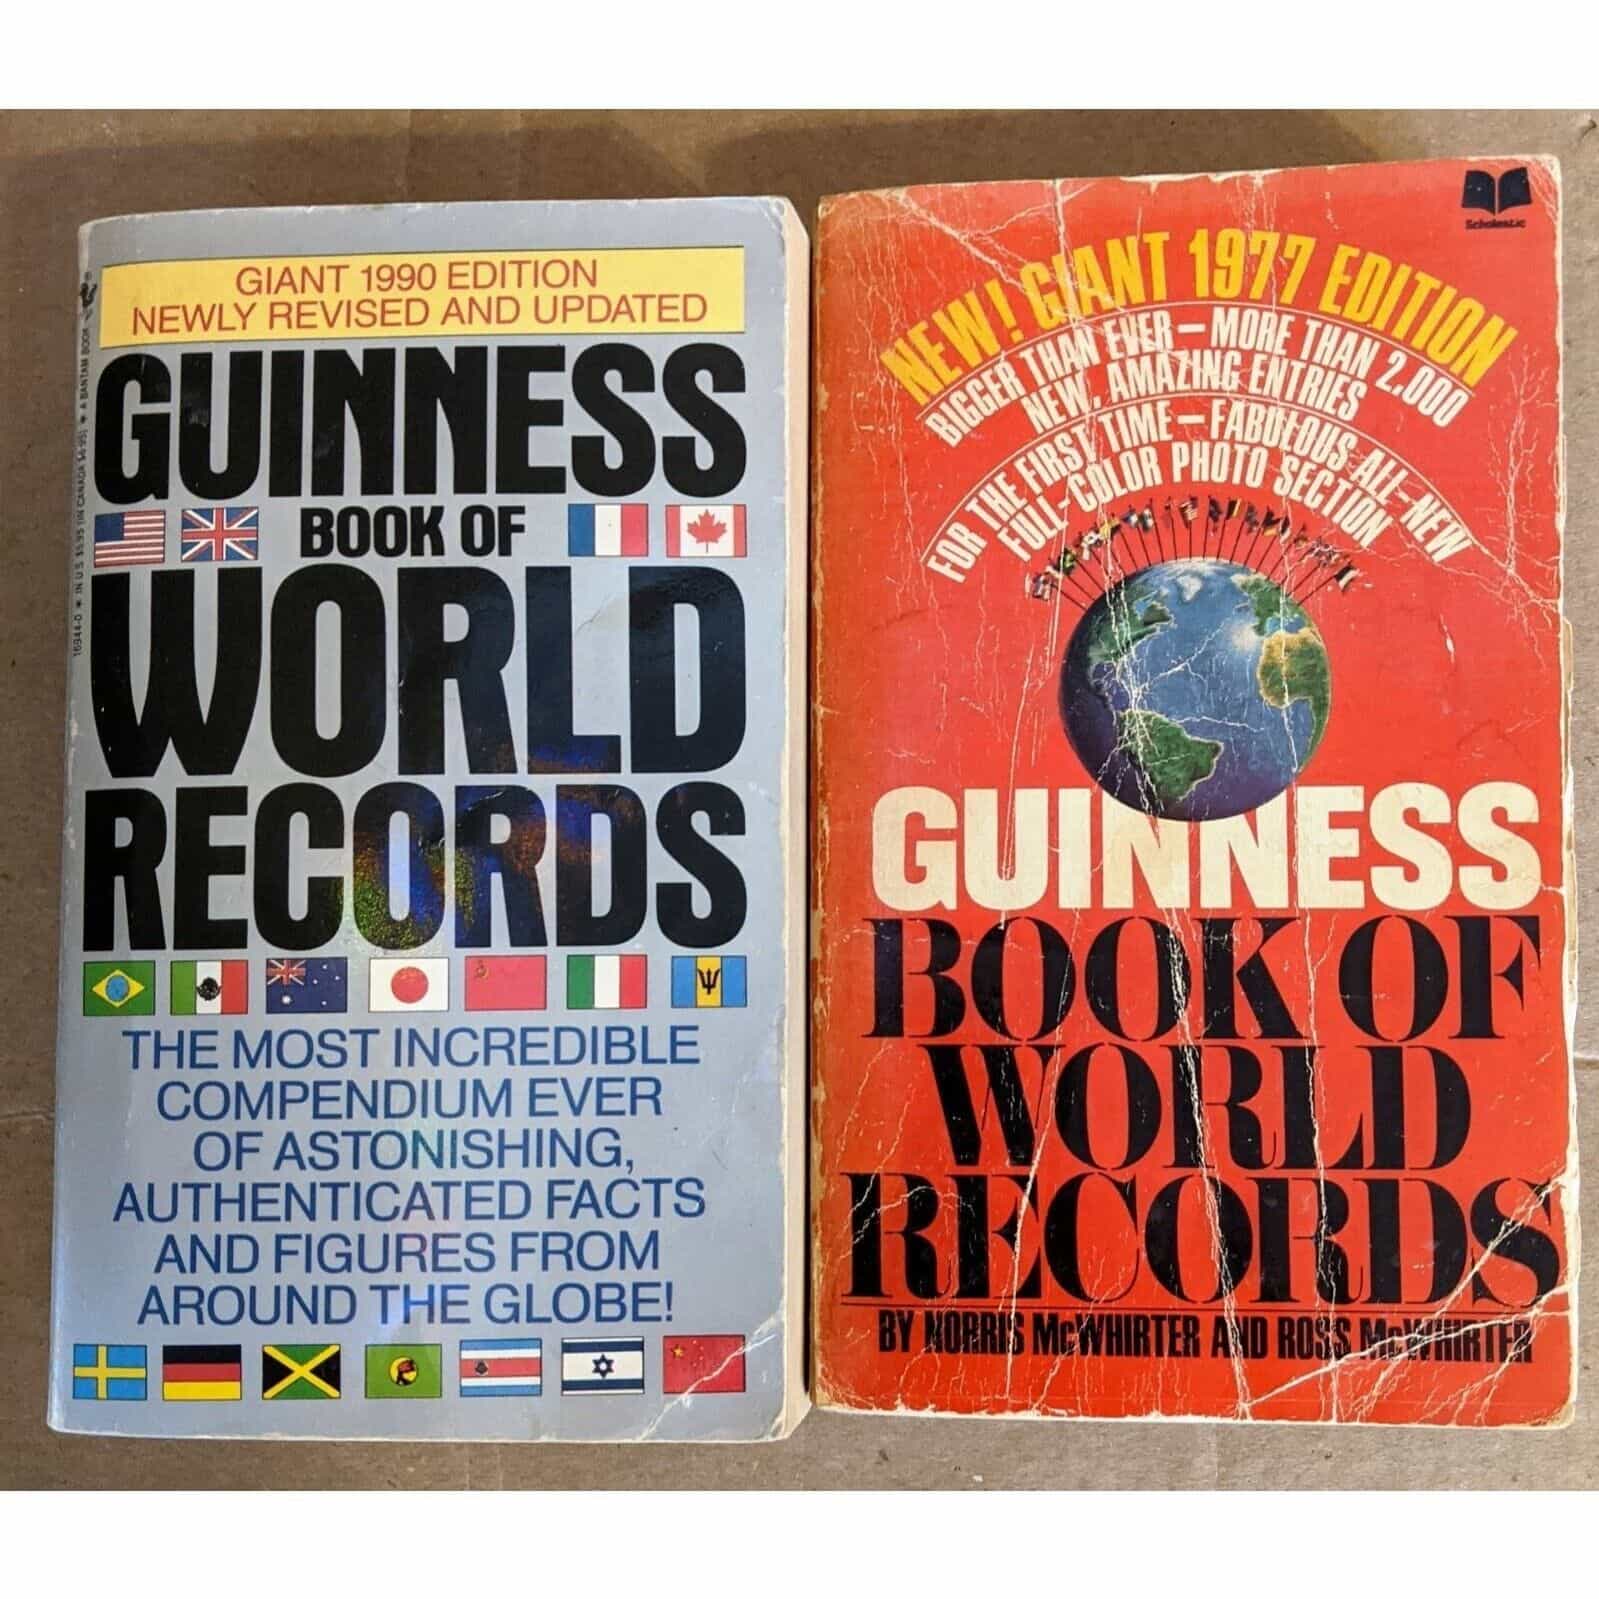 Guinness Book of World Records Set of 2 - 1977 & 1990